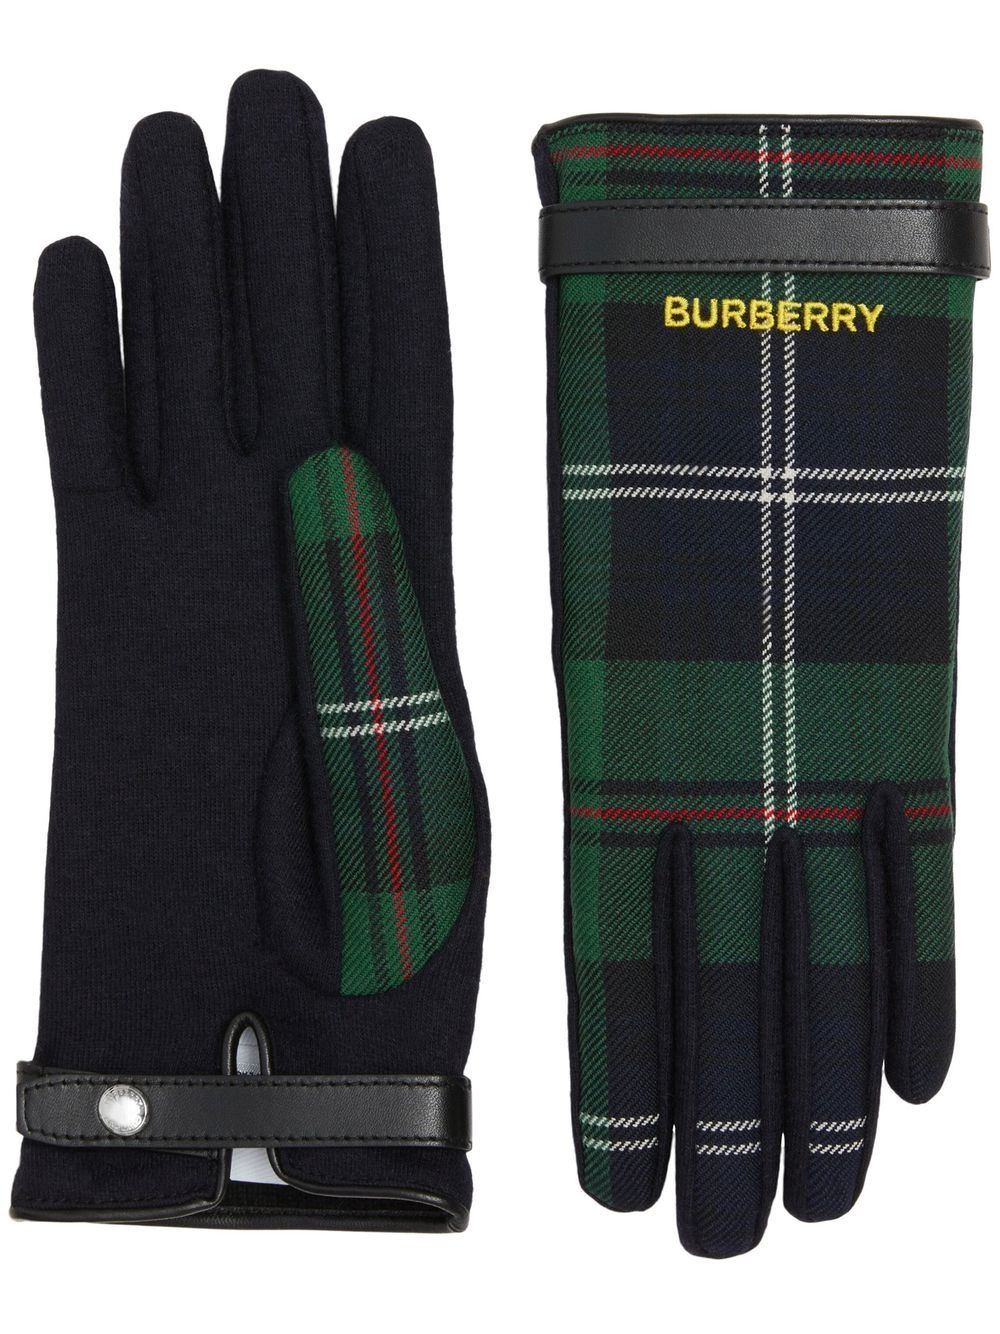 BURBERRY CHECK-PATTERN KNITTED GLOVES